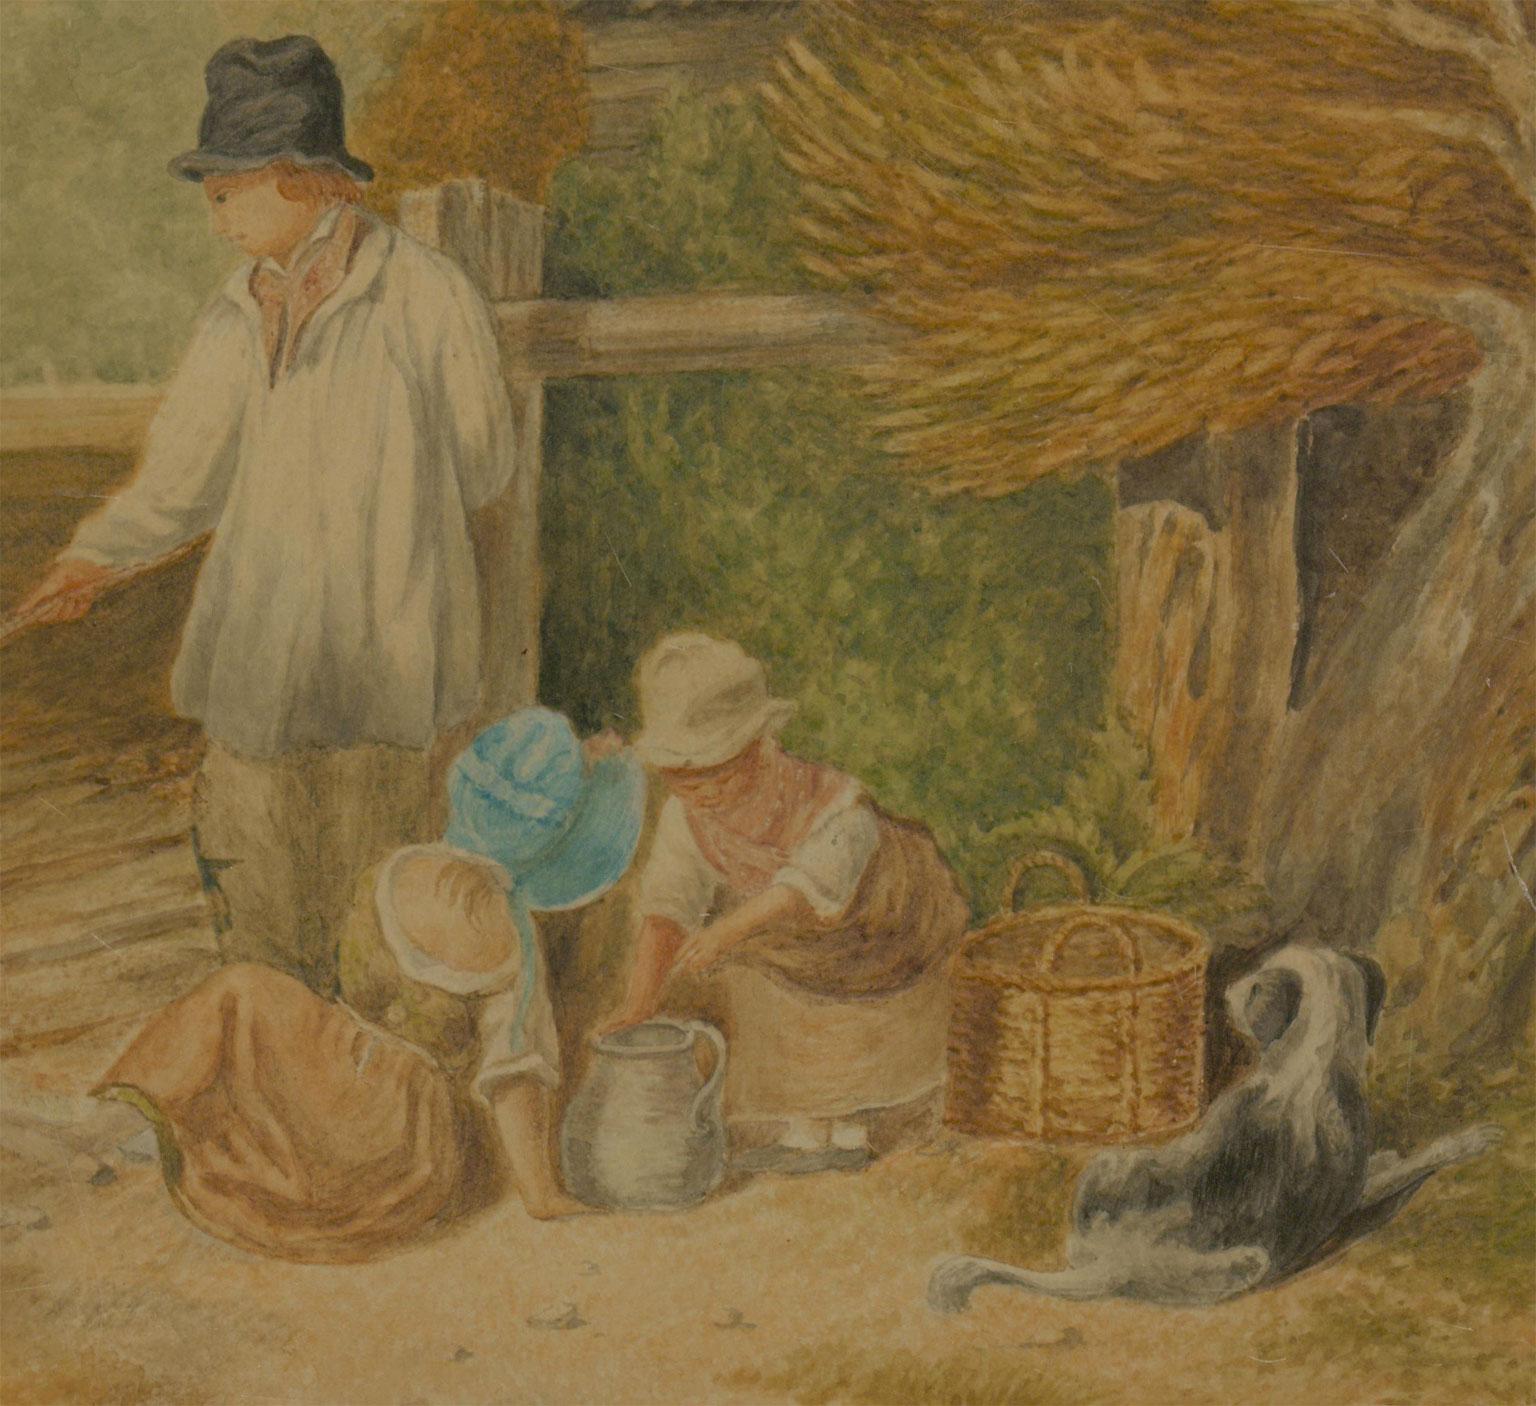 A delicate and finely painted 19th Century study of a boy fishing in the countryside with two young girls and a dog. The watercolour painting is highlighted with gouache and contains intricate brushstrokes and finer details. The expressive nature of